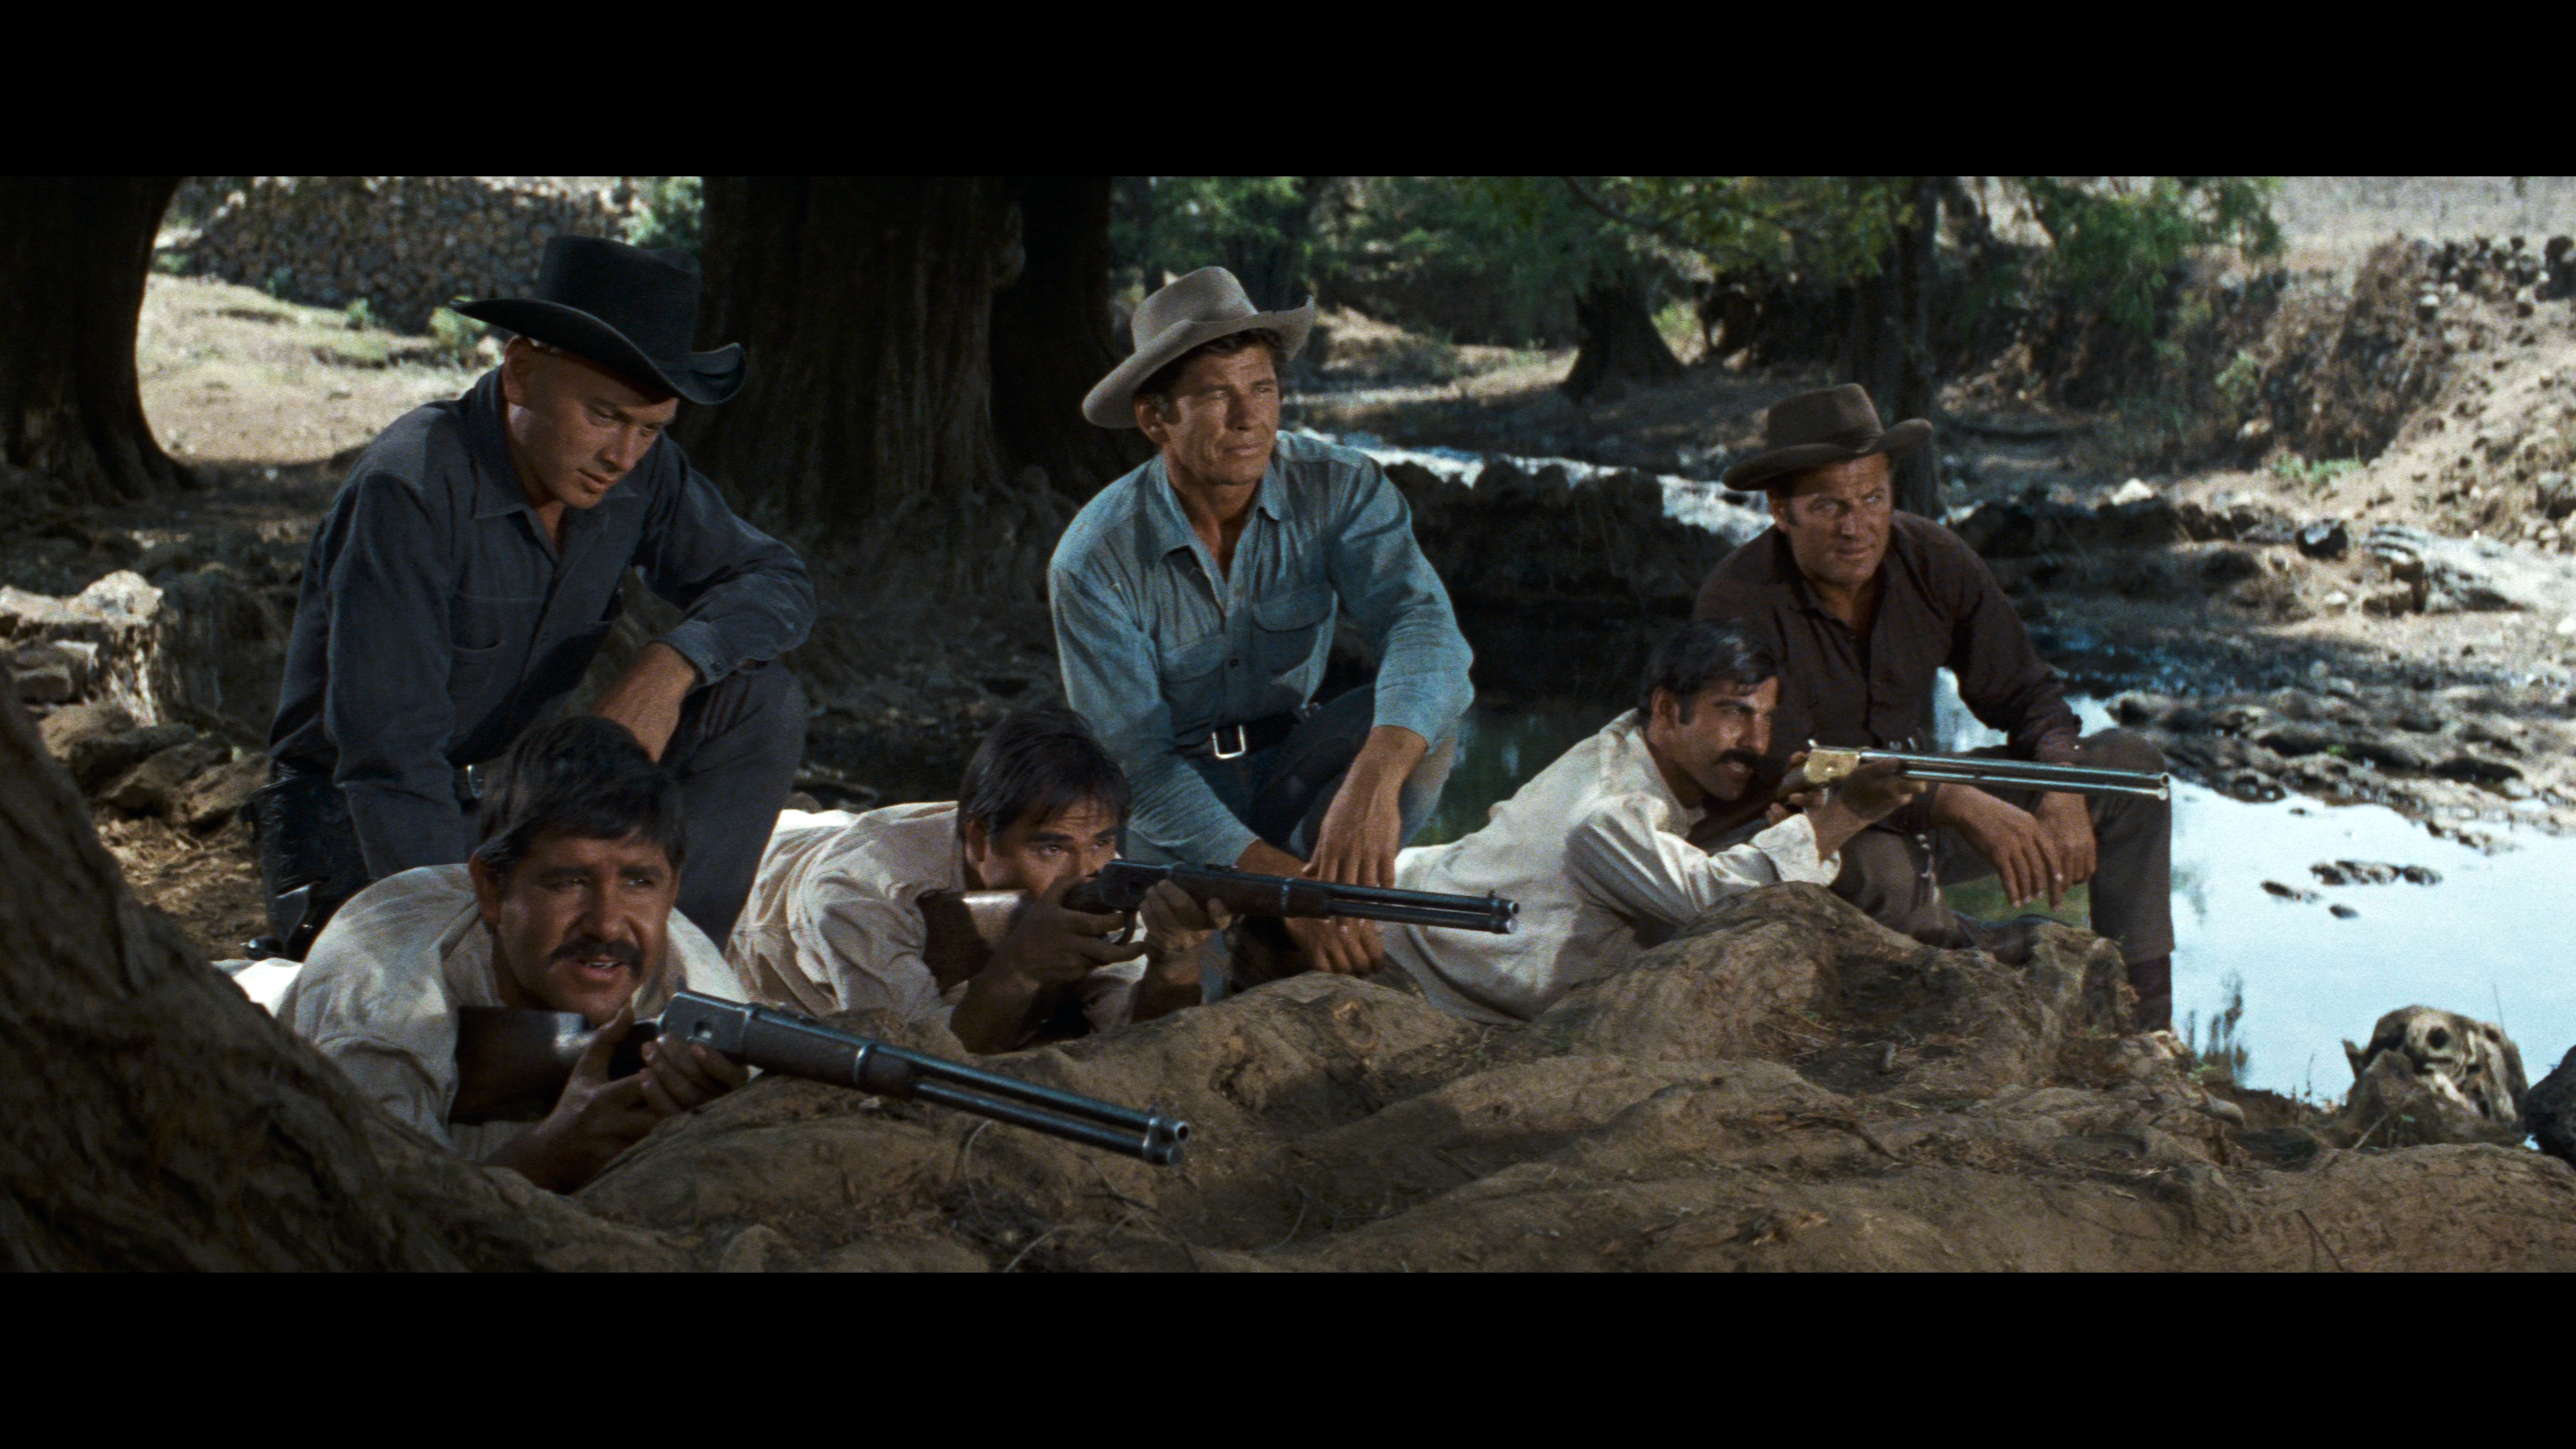 The Magnificent Seven (1960) - 4K Ultra HD Blu-ray Ultra HD Review